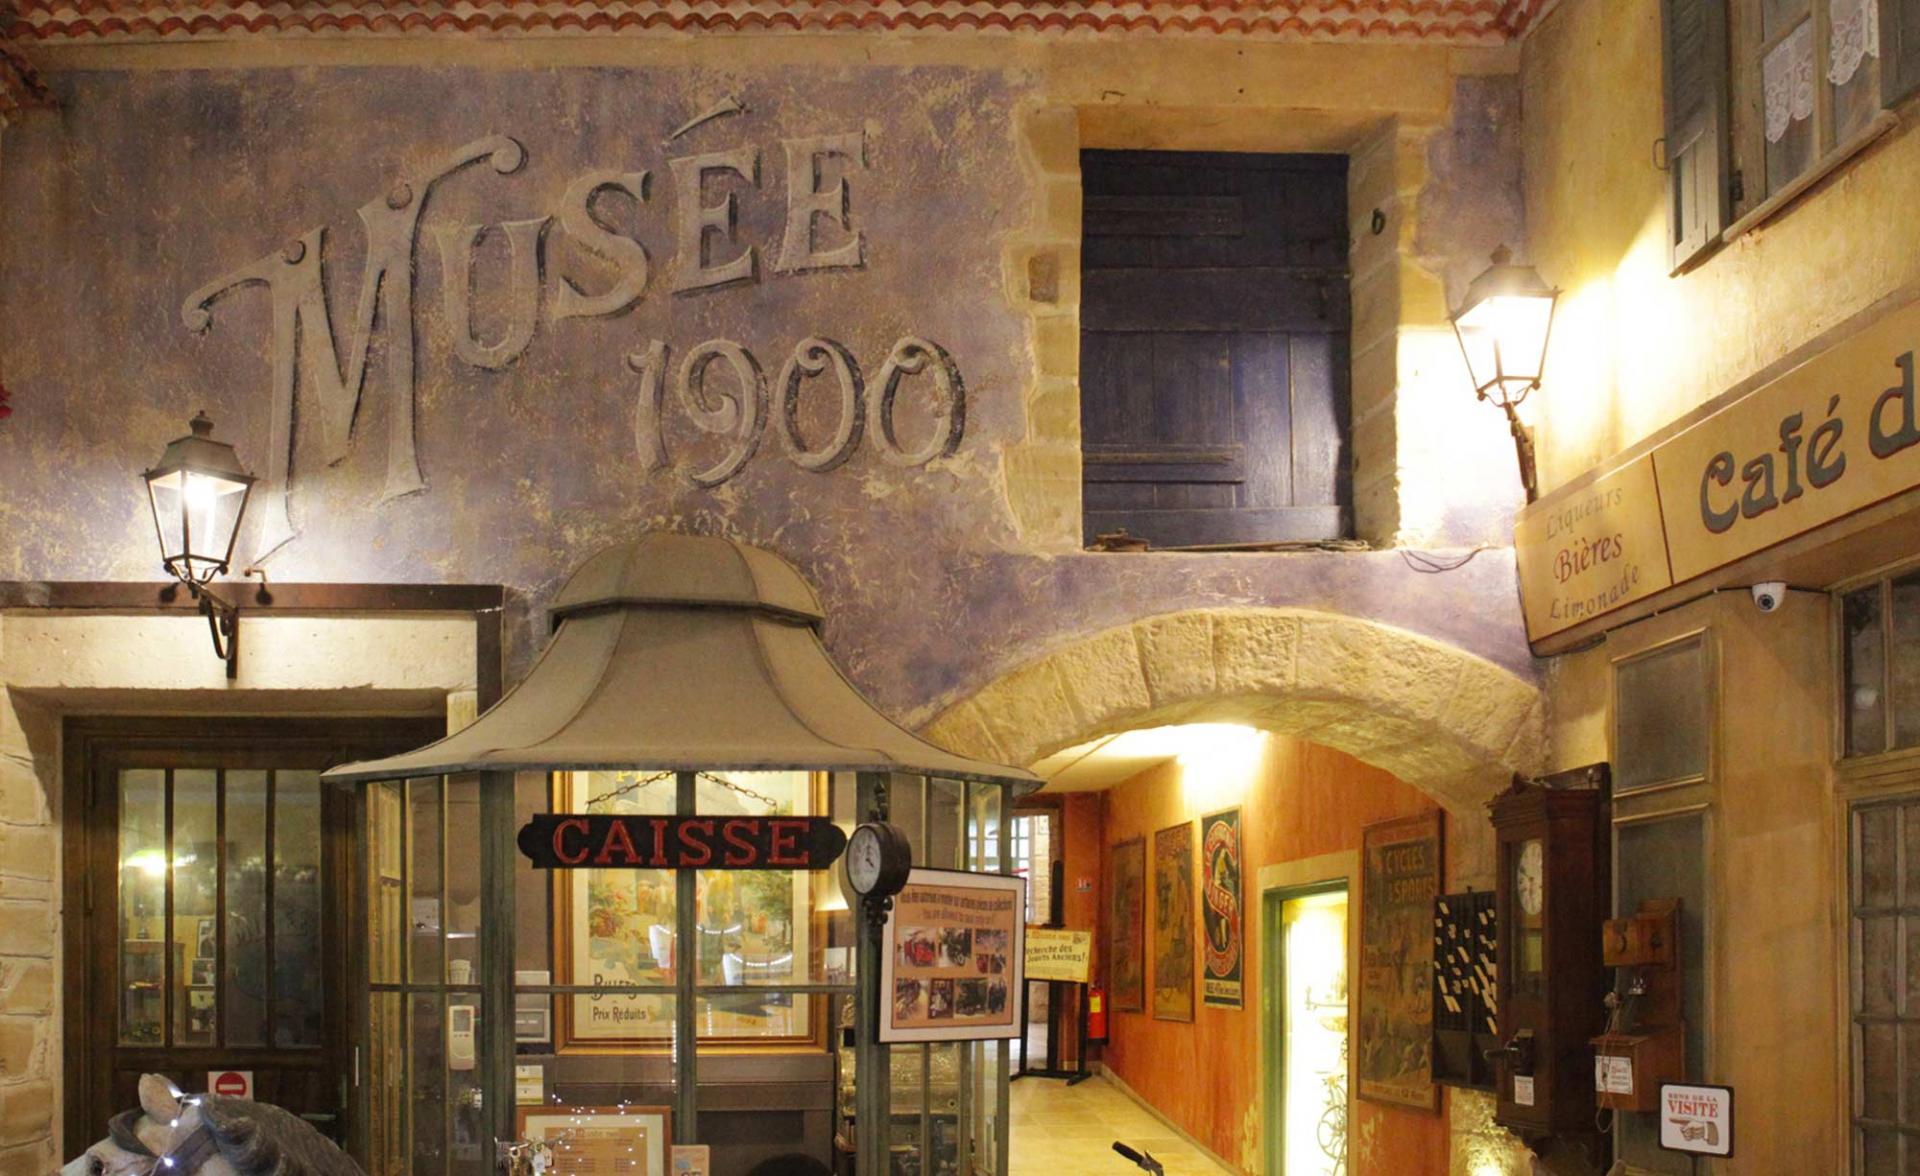 Musee 1900 uzes arpaillargues